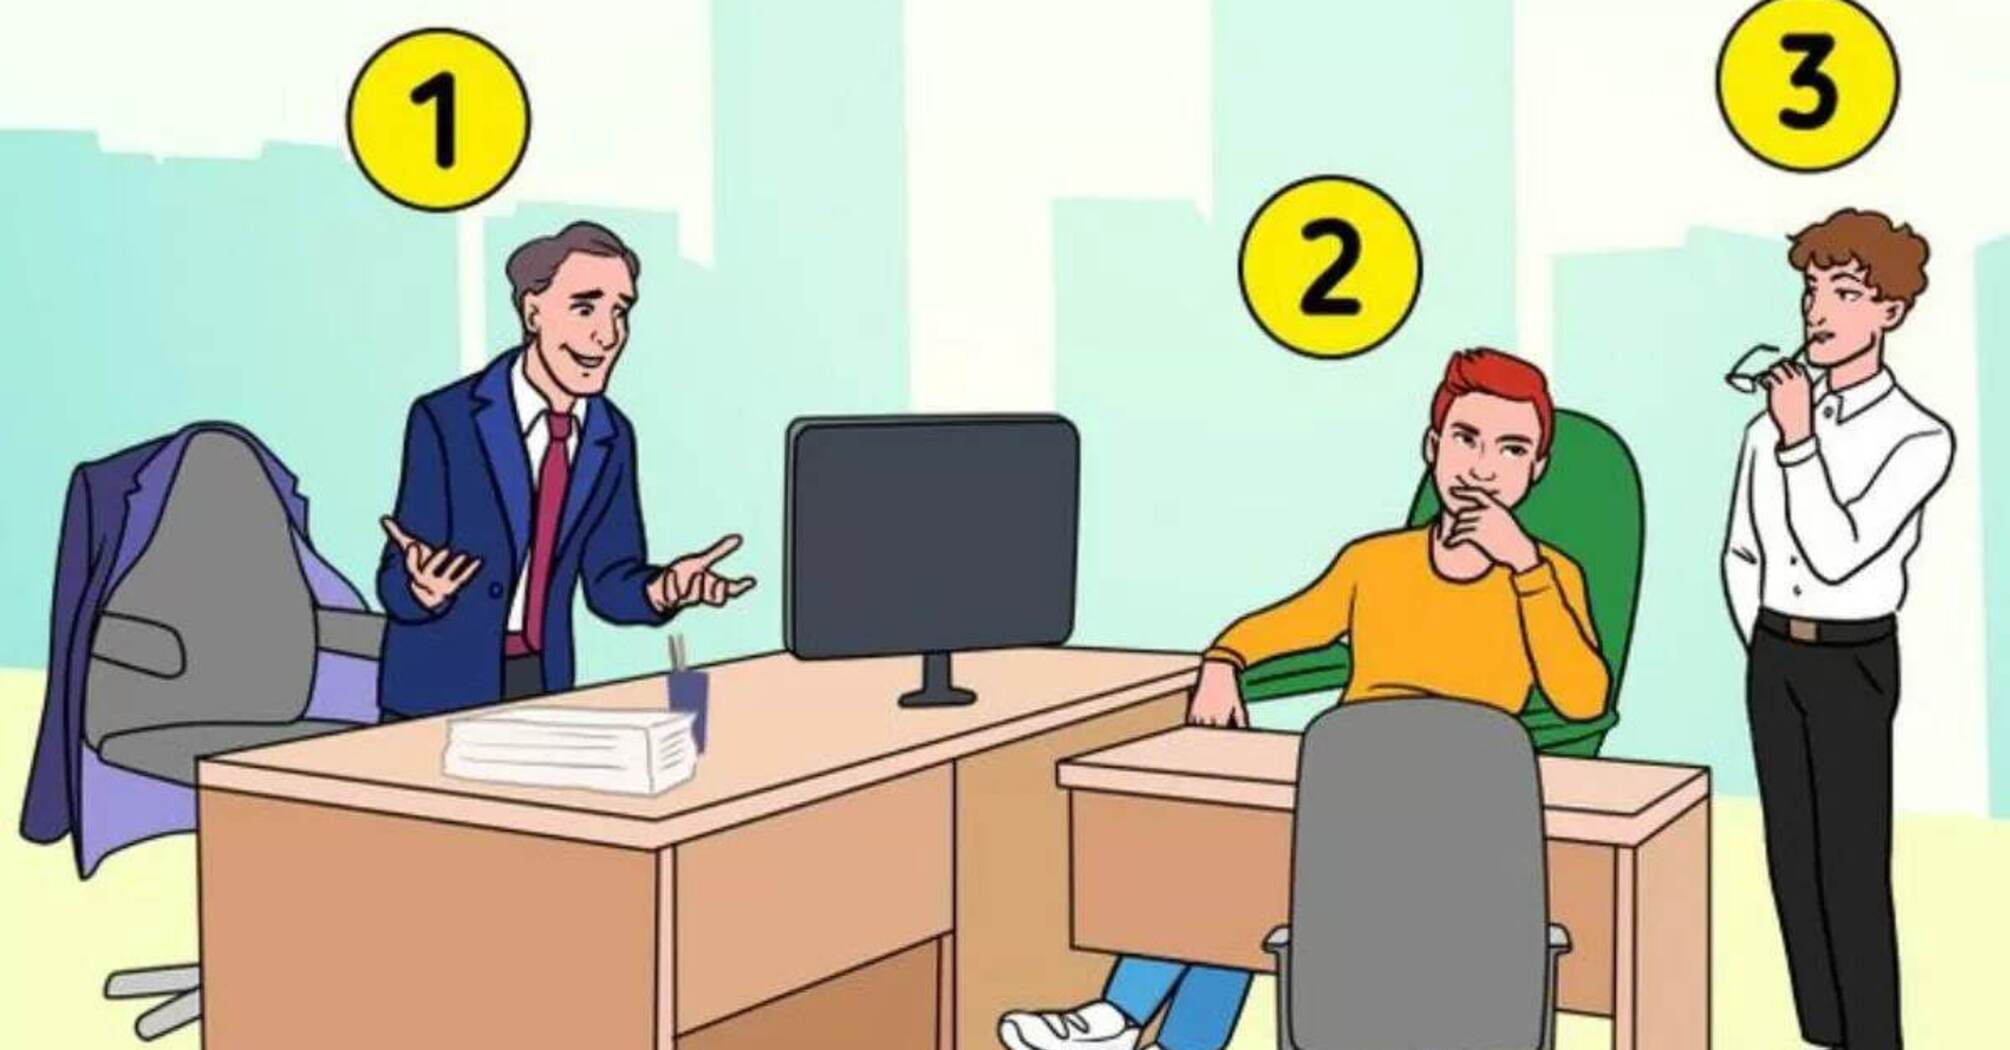 Who is the real boss in office room